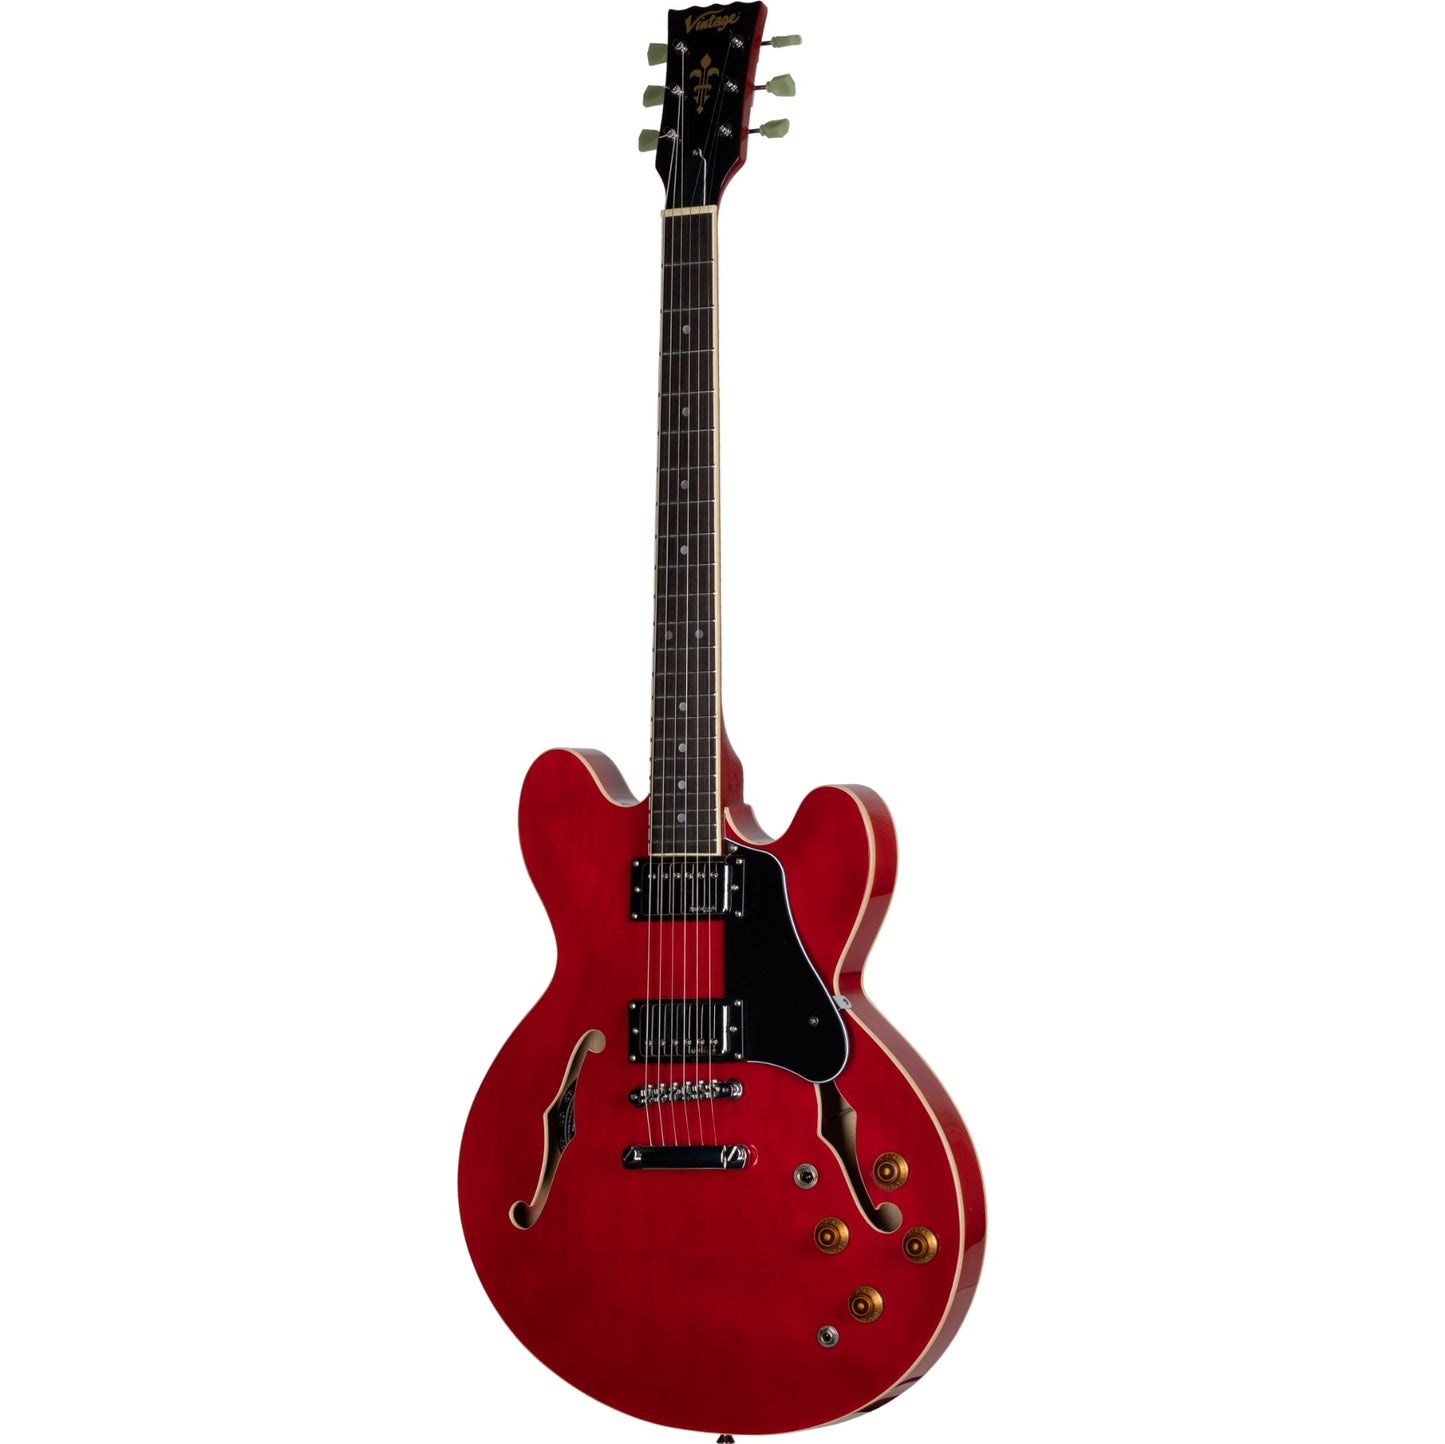 Vintage Reissue VSA500CR Cherry Red ES Style Semi Hollow Electric Guitar (VSA500CR)